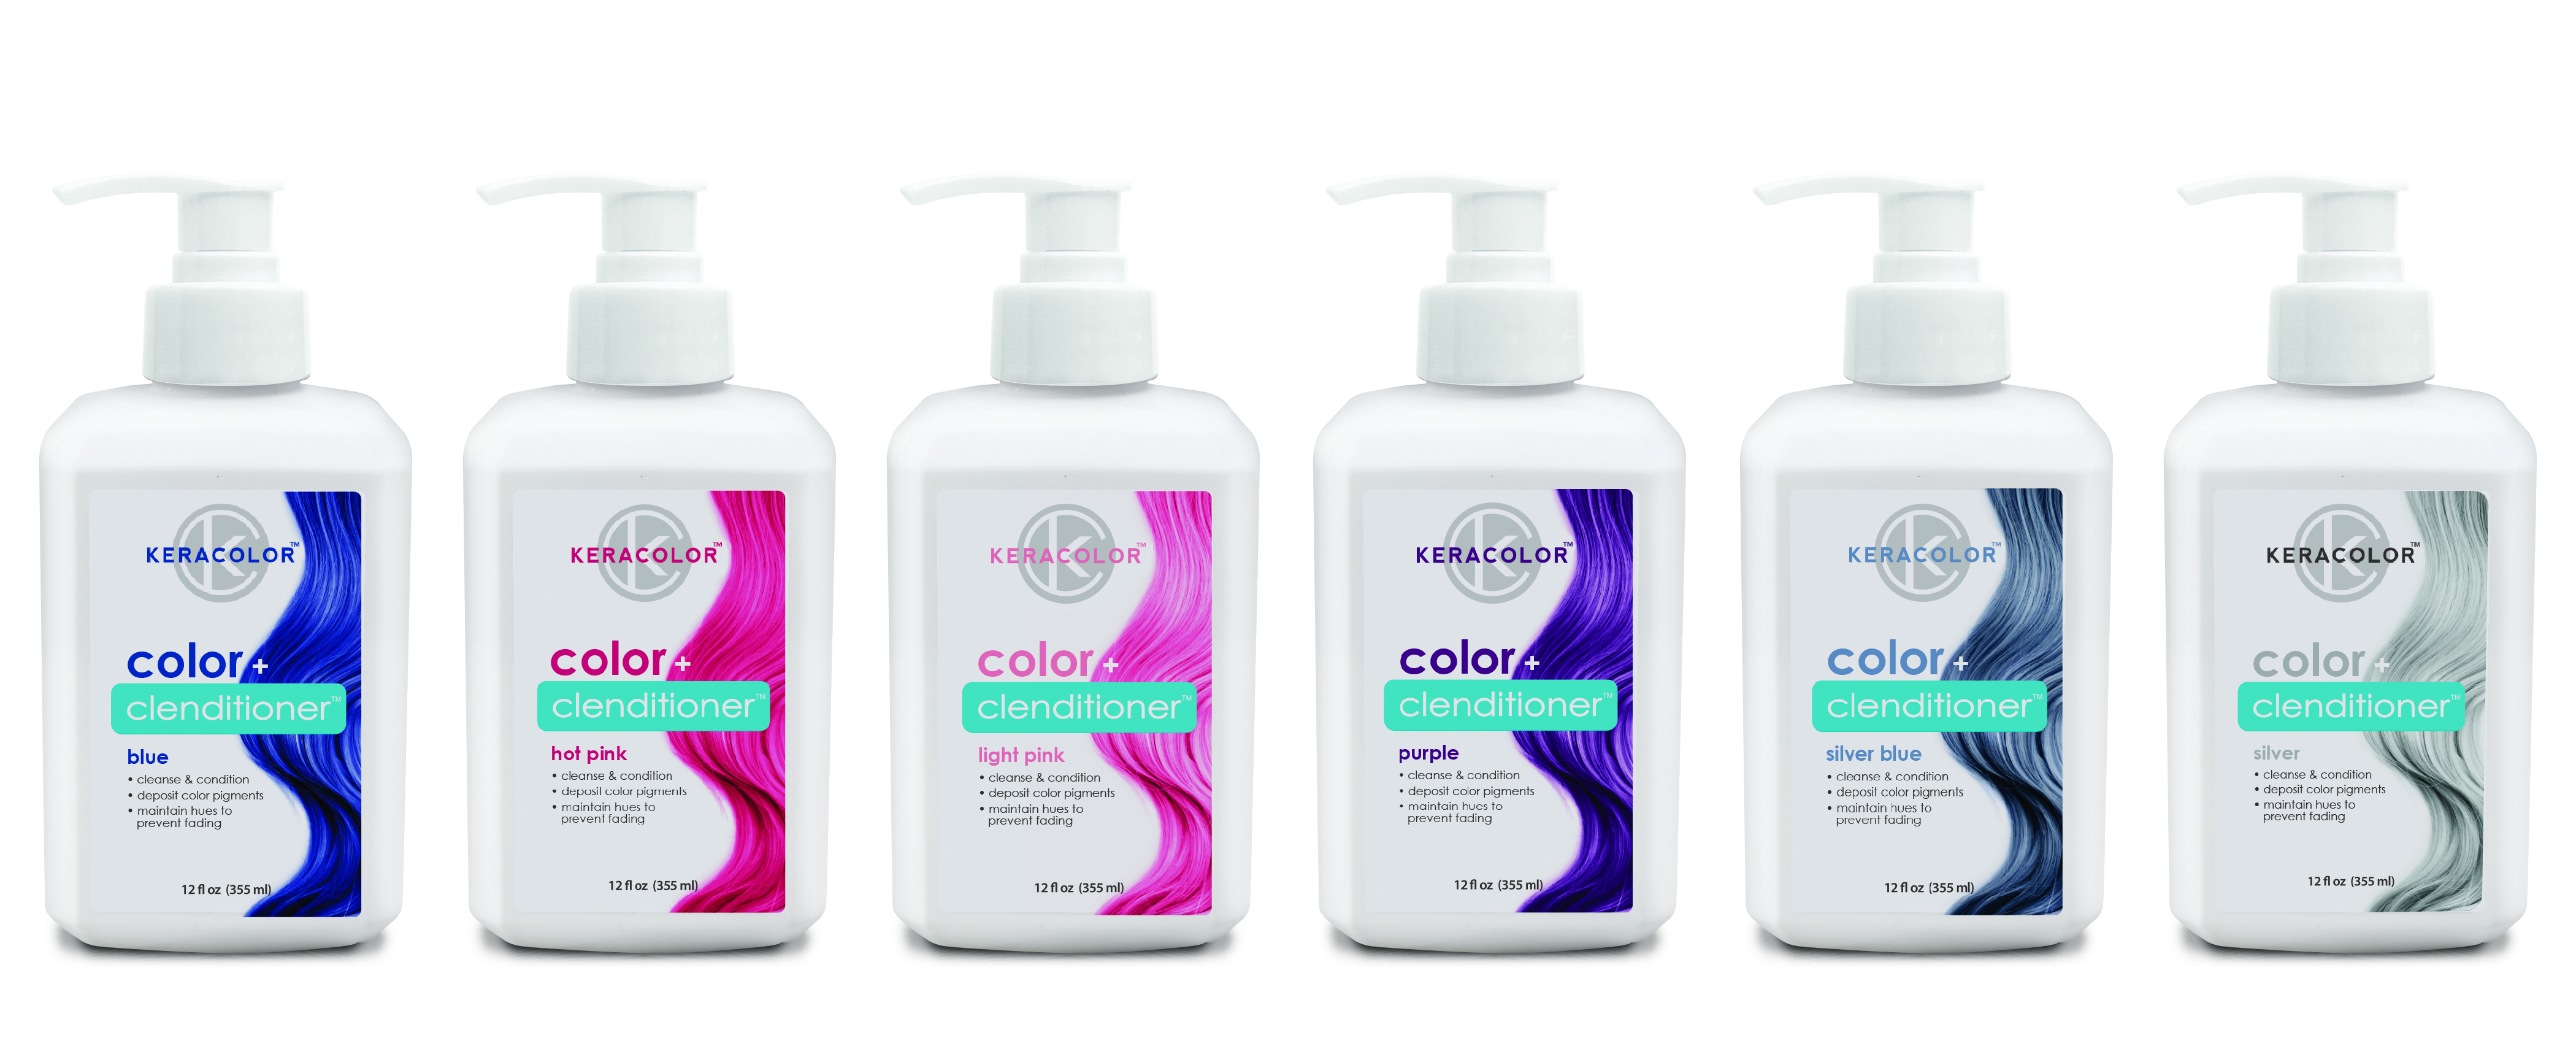 keracolor takes hair color vibrant territory. 